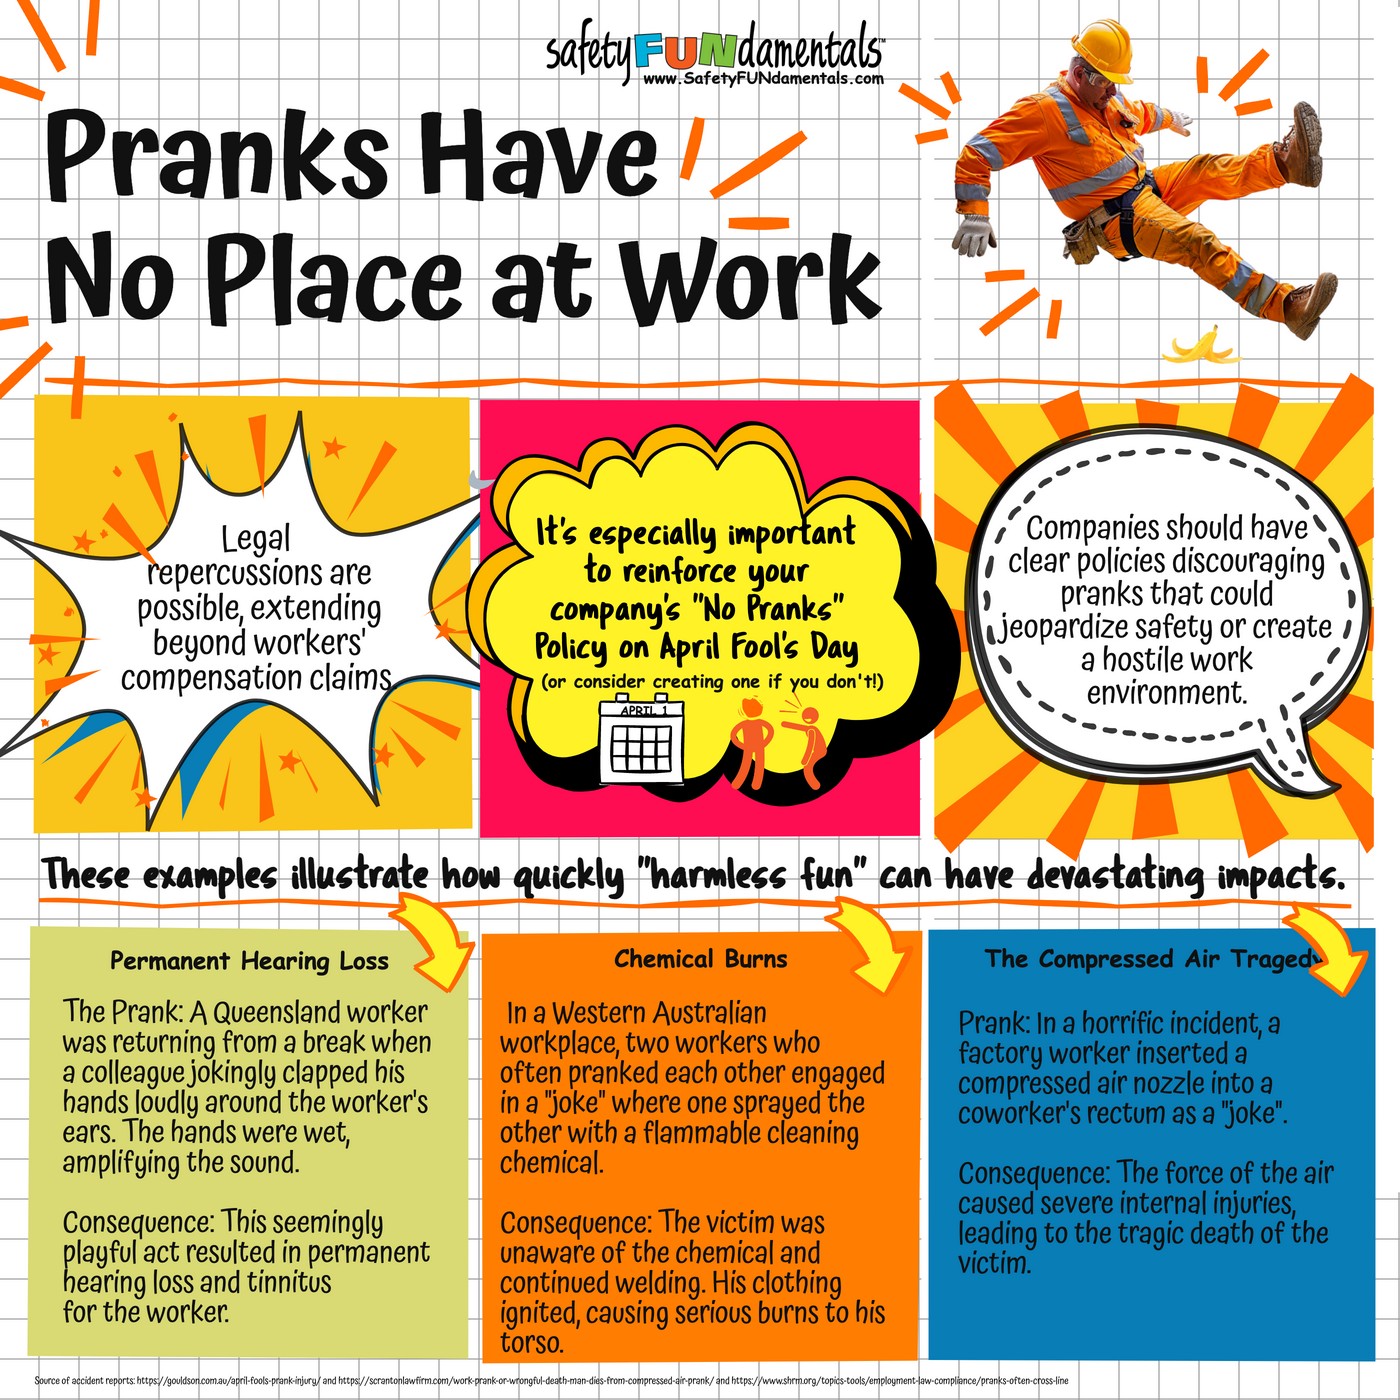 Watch Out for Pranks on April Fool's Day!